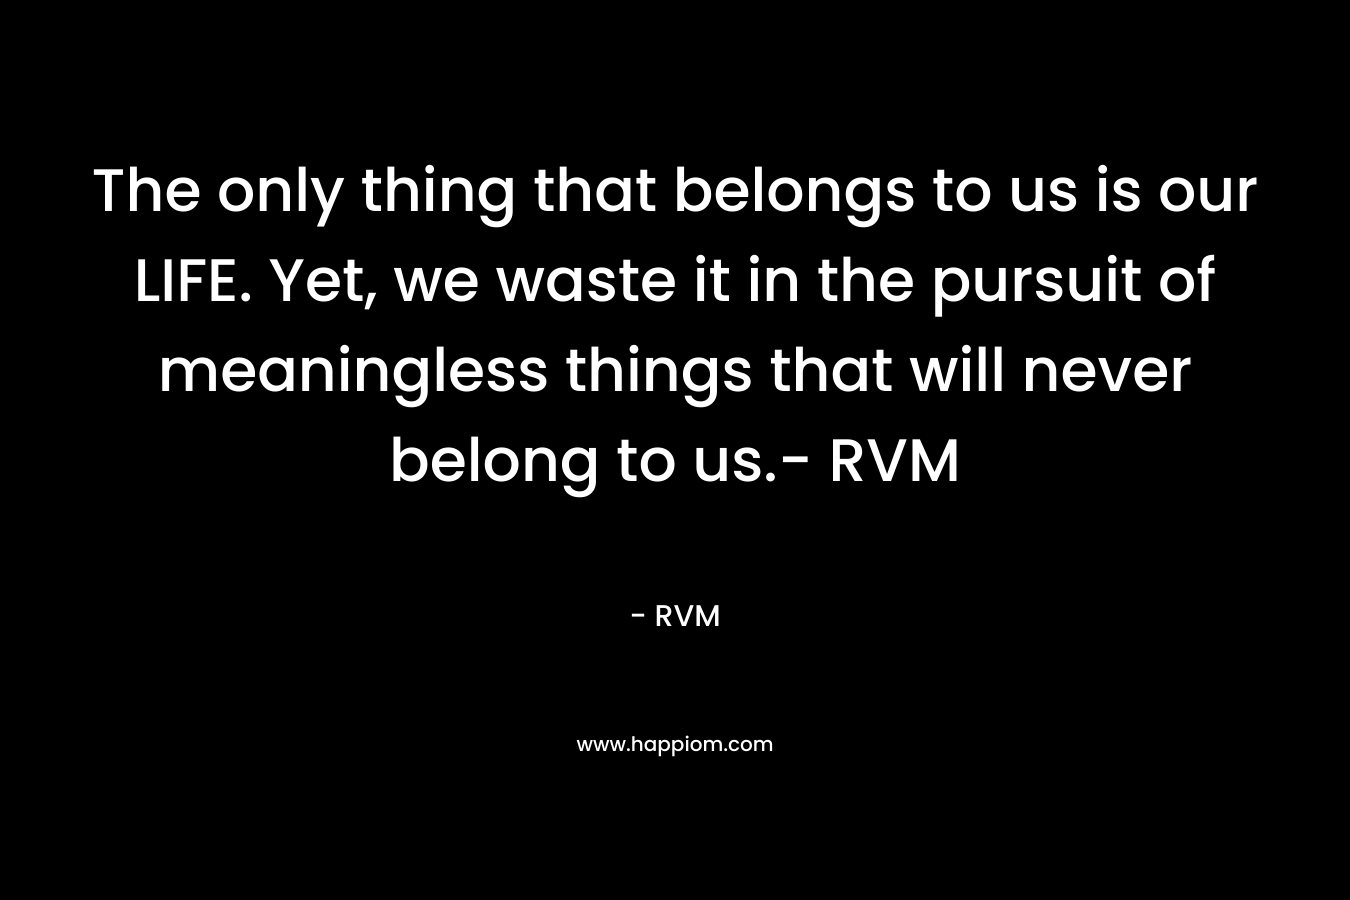 The only thing that belongs to us is our LIFE. Yet, we waste it in the pursuit of meaningless things that will never belong to us.- RVM